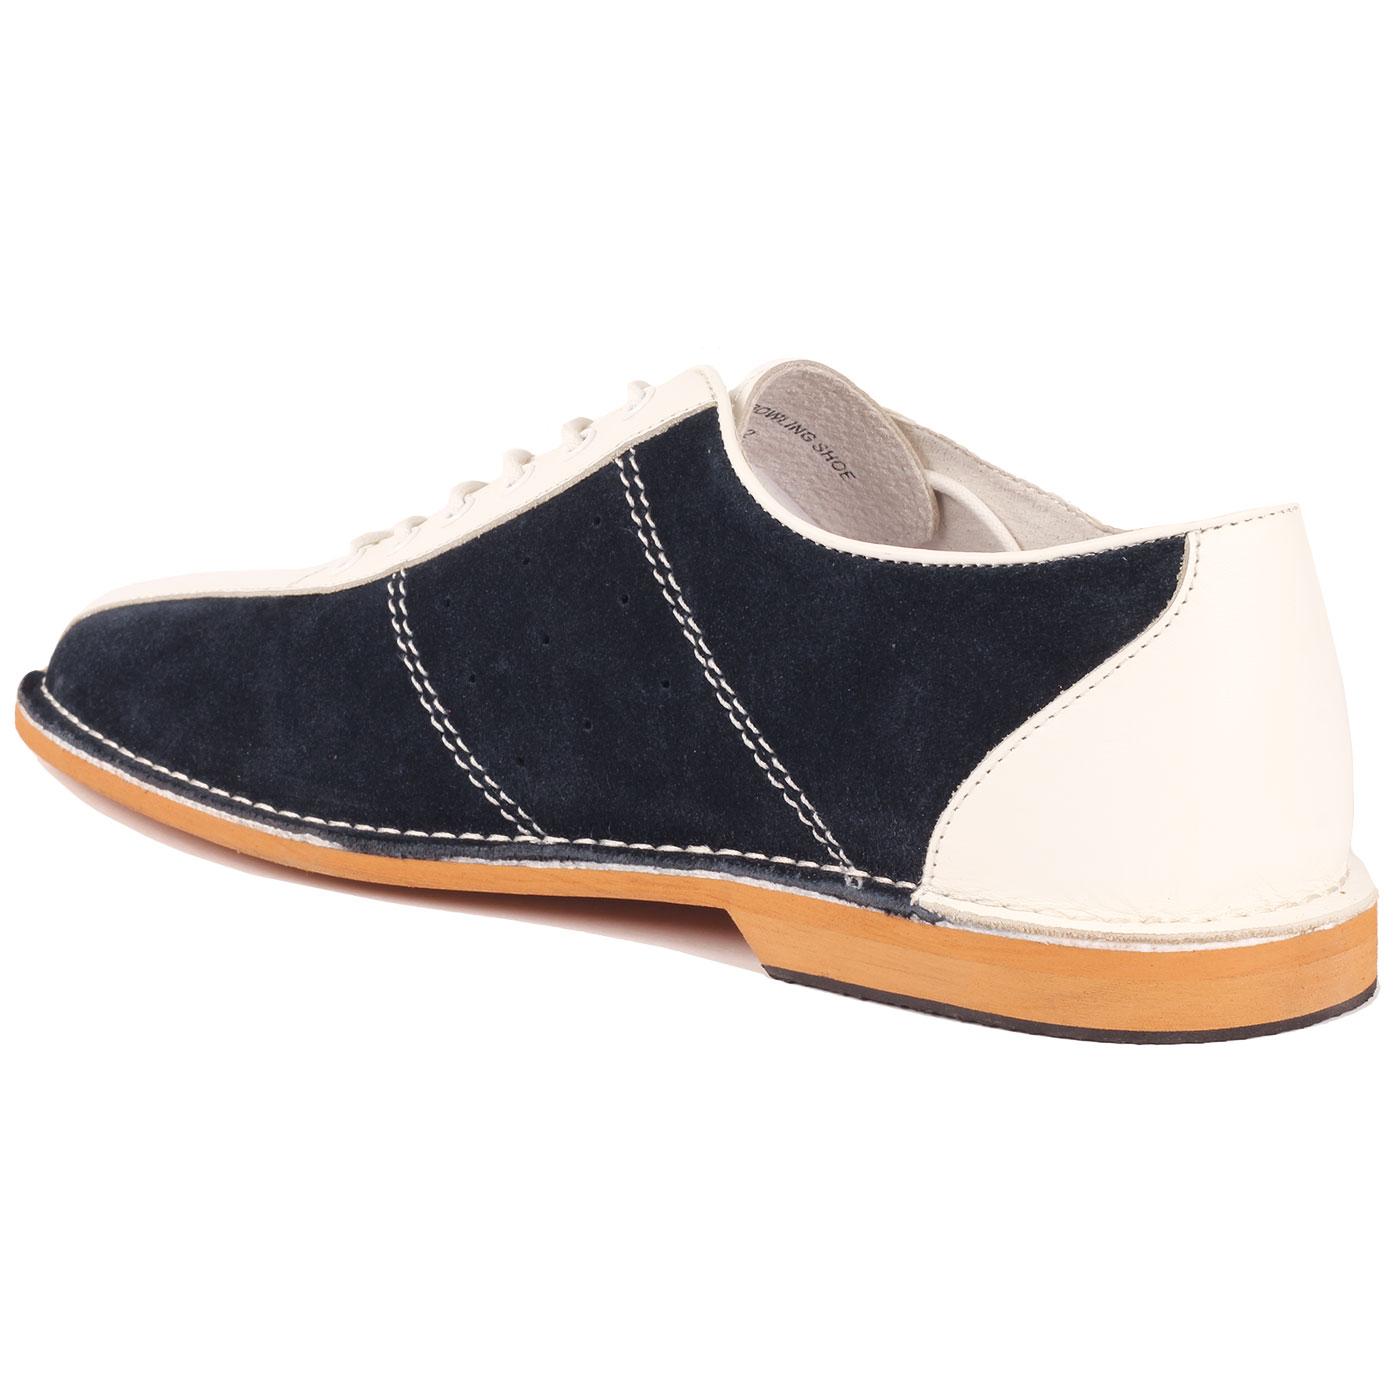 MADCAP ENGLAND All Up Bowling Shoes in Wine/White/Navy